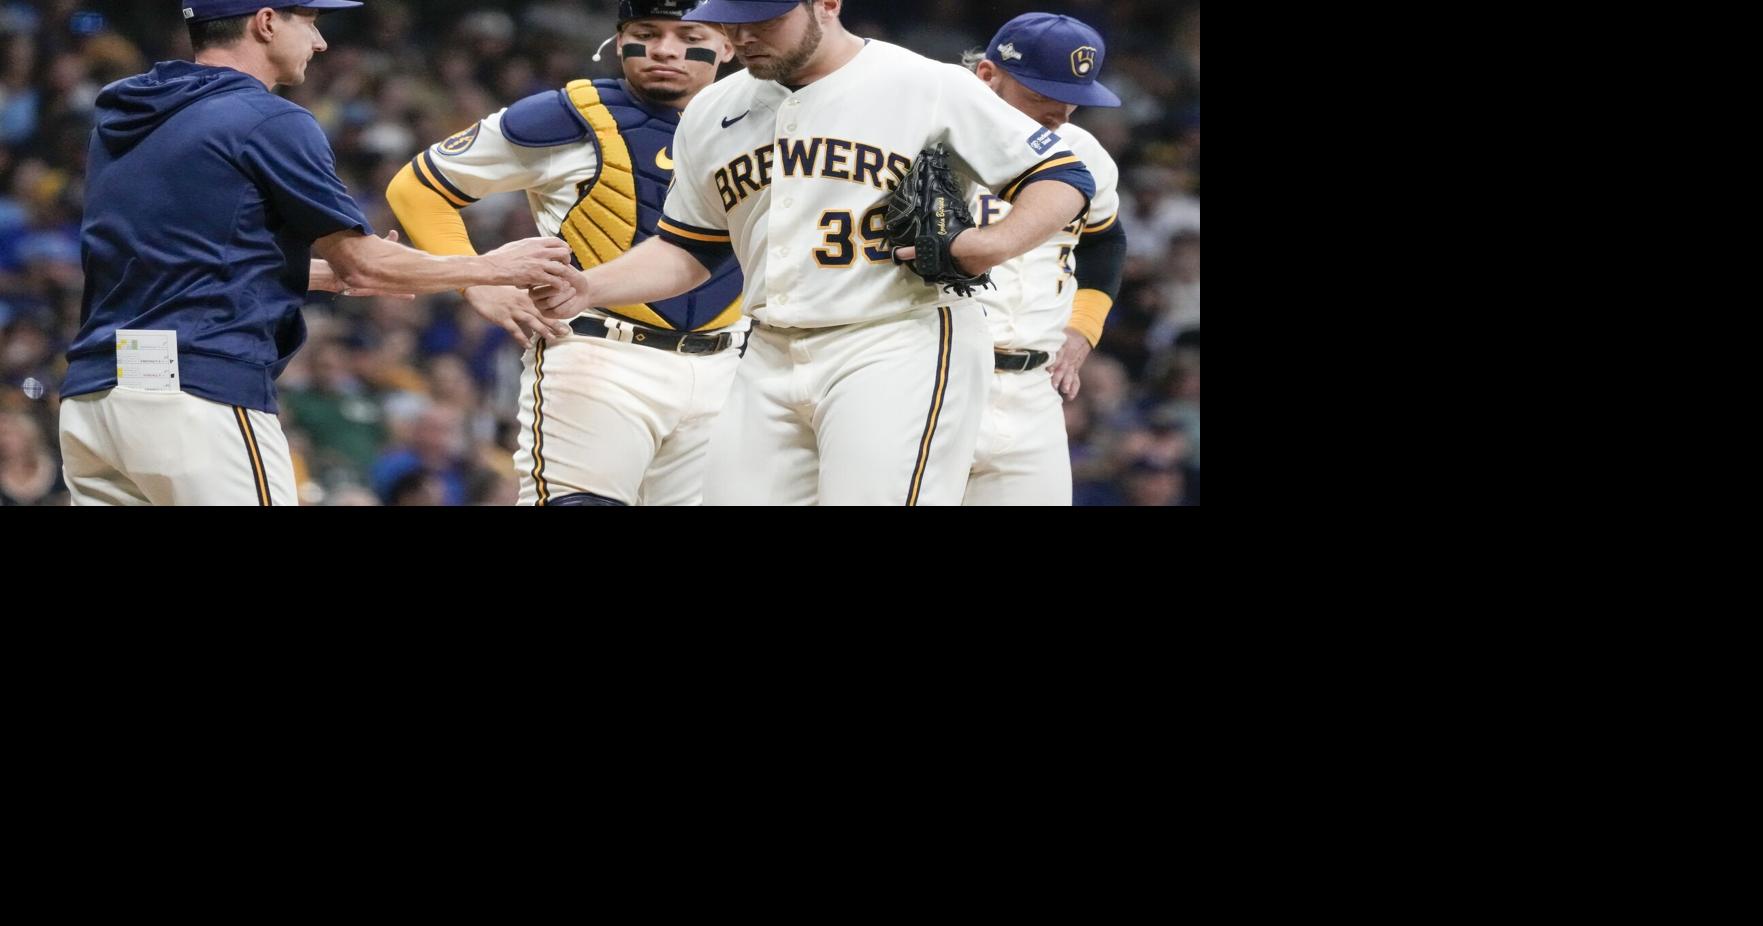 Burnes gets hit hard as Brewers strand 11 runners on base